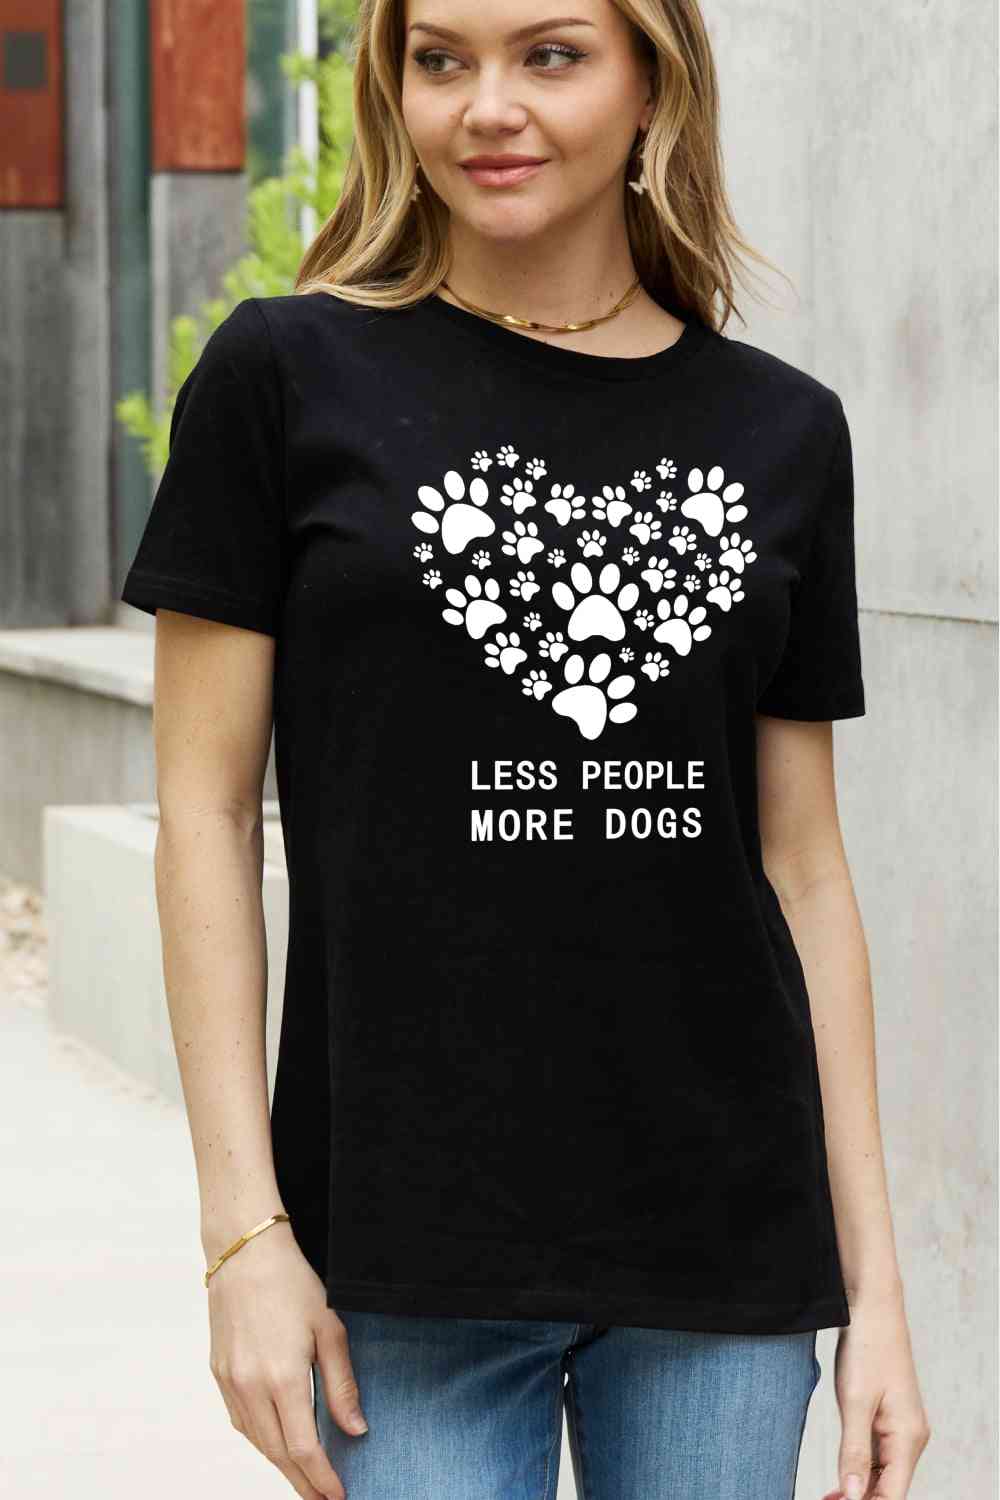 MORE DOGS, LESS PEOPLE Tee Shirt: Unleash Passion in Style! 🐾💖